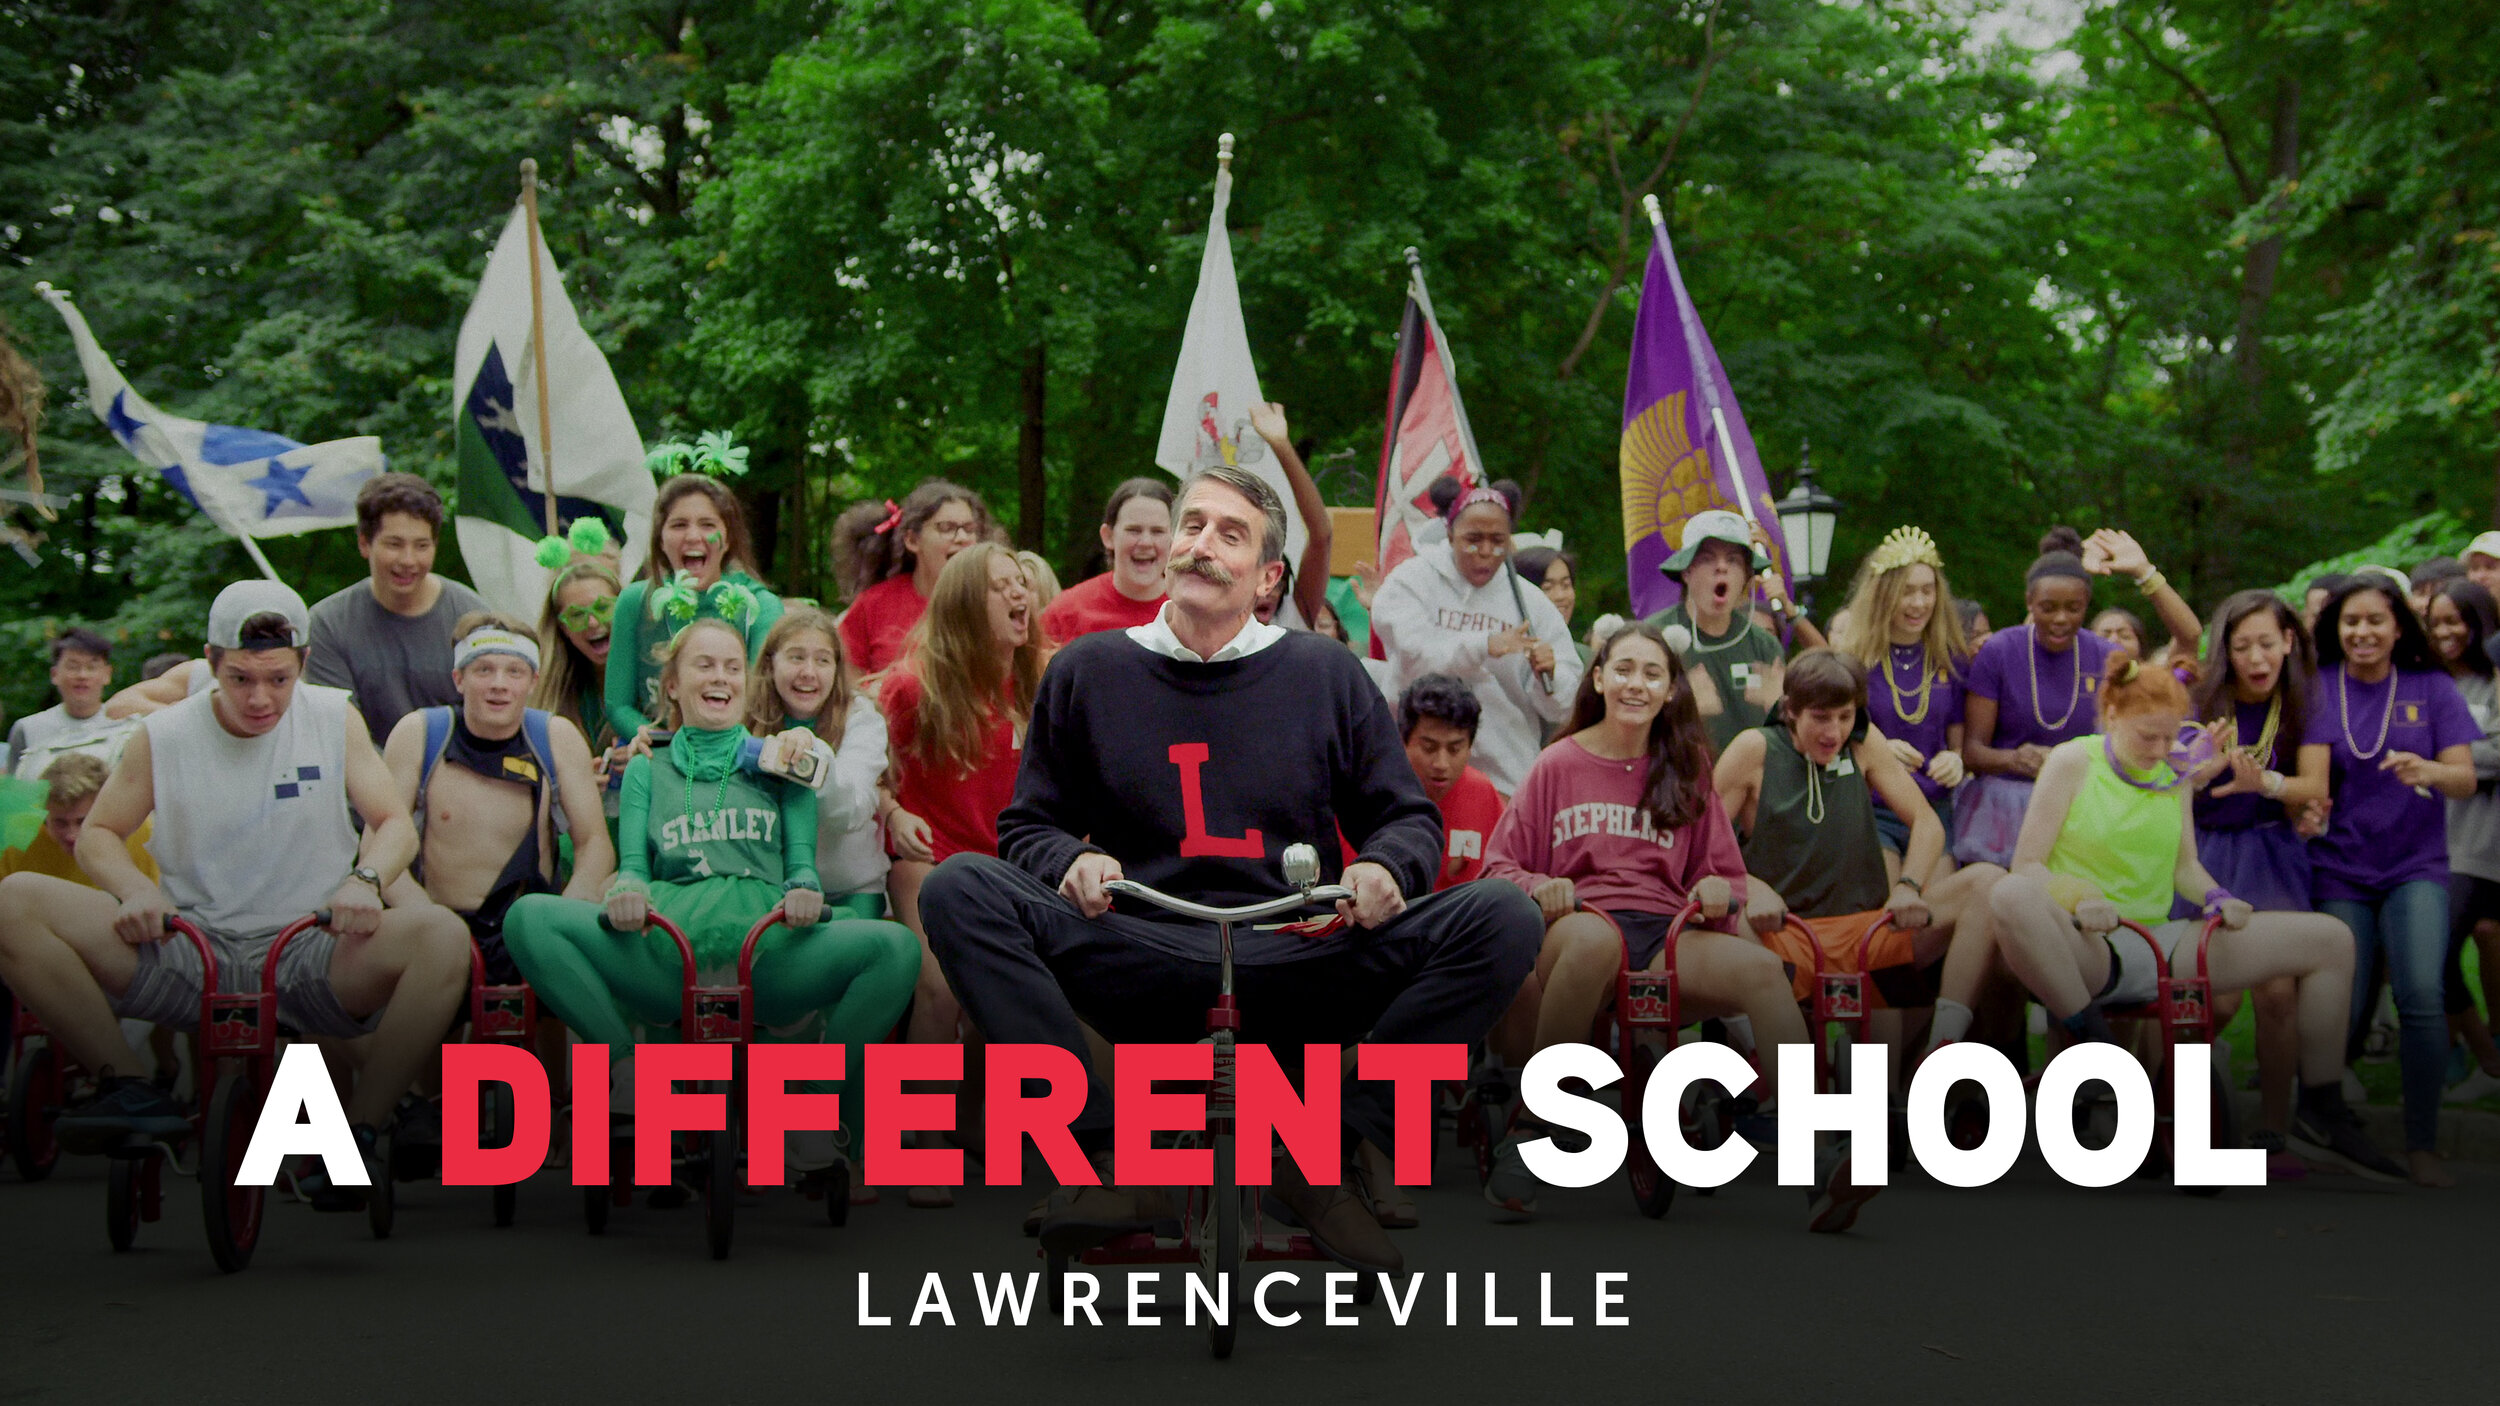 A Different School - Lawrenceville